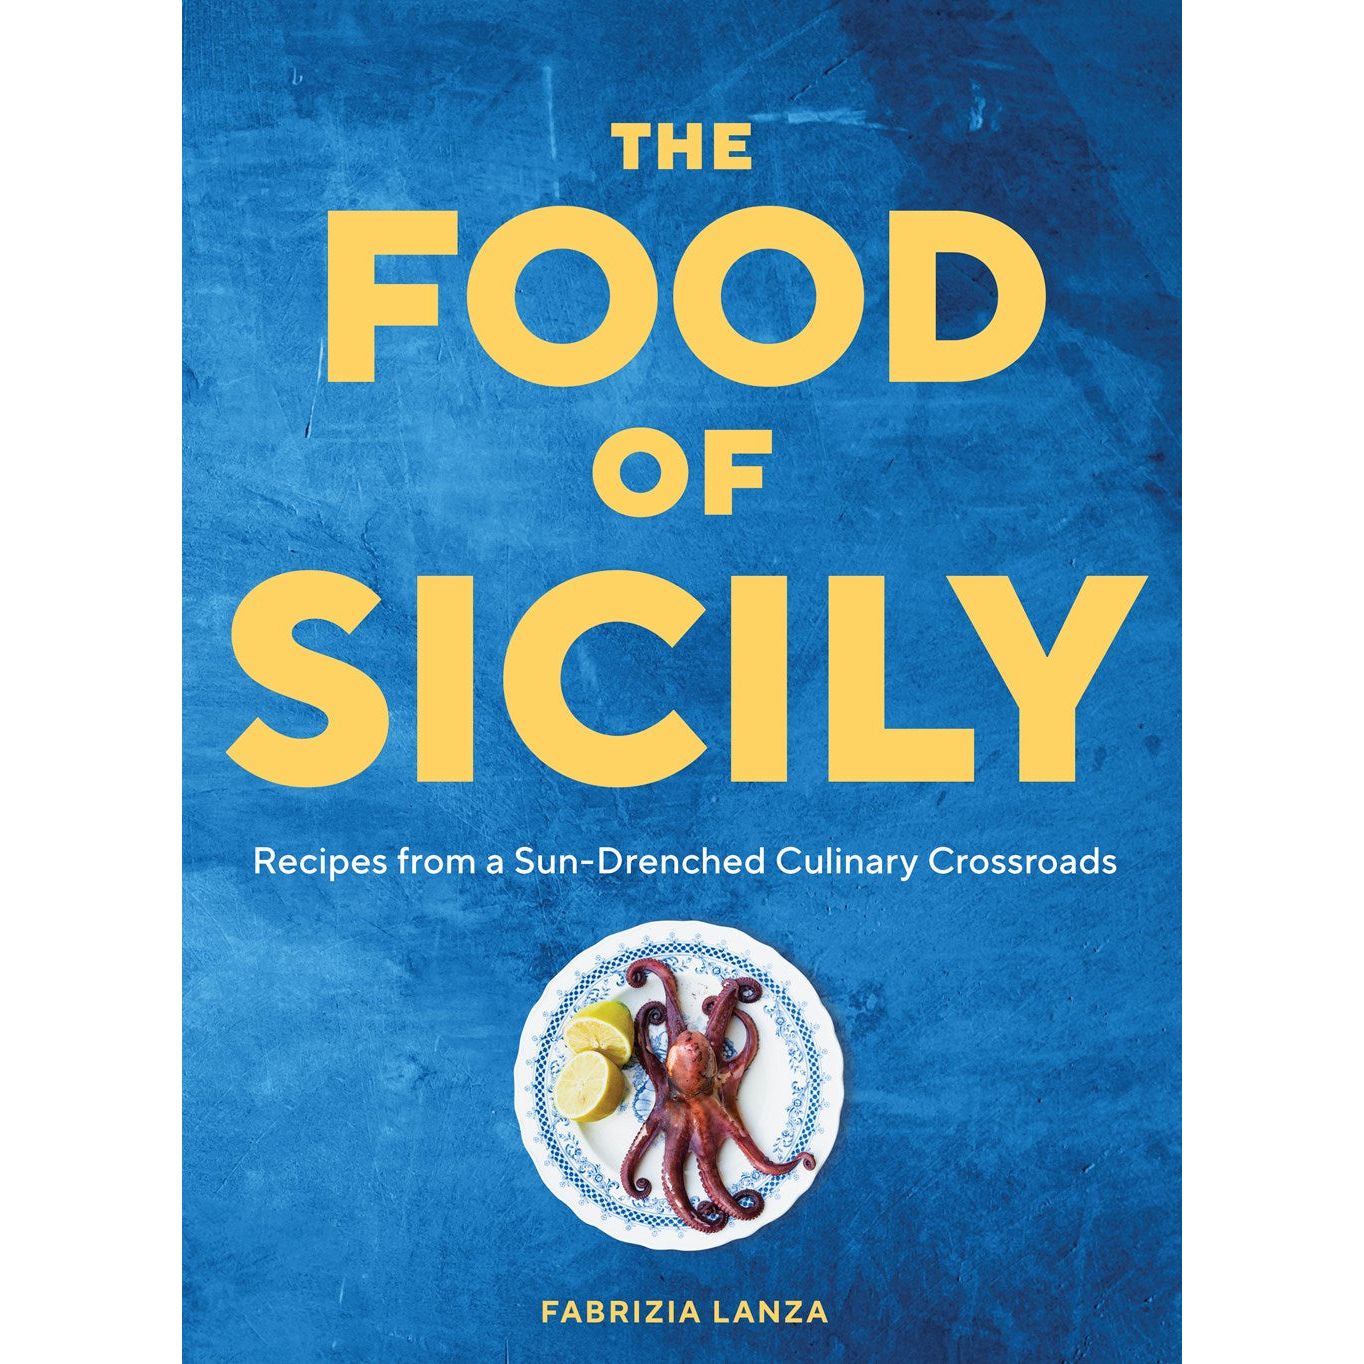 The Food of Sicily : Recipes from a Sun-Drenched Culinary Crossroads (Fabrizia Lanza)